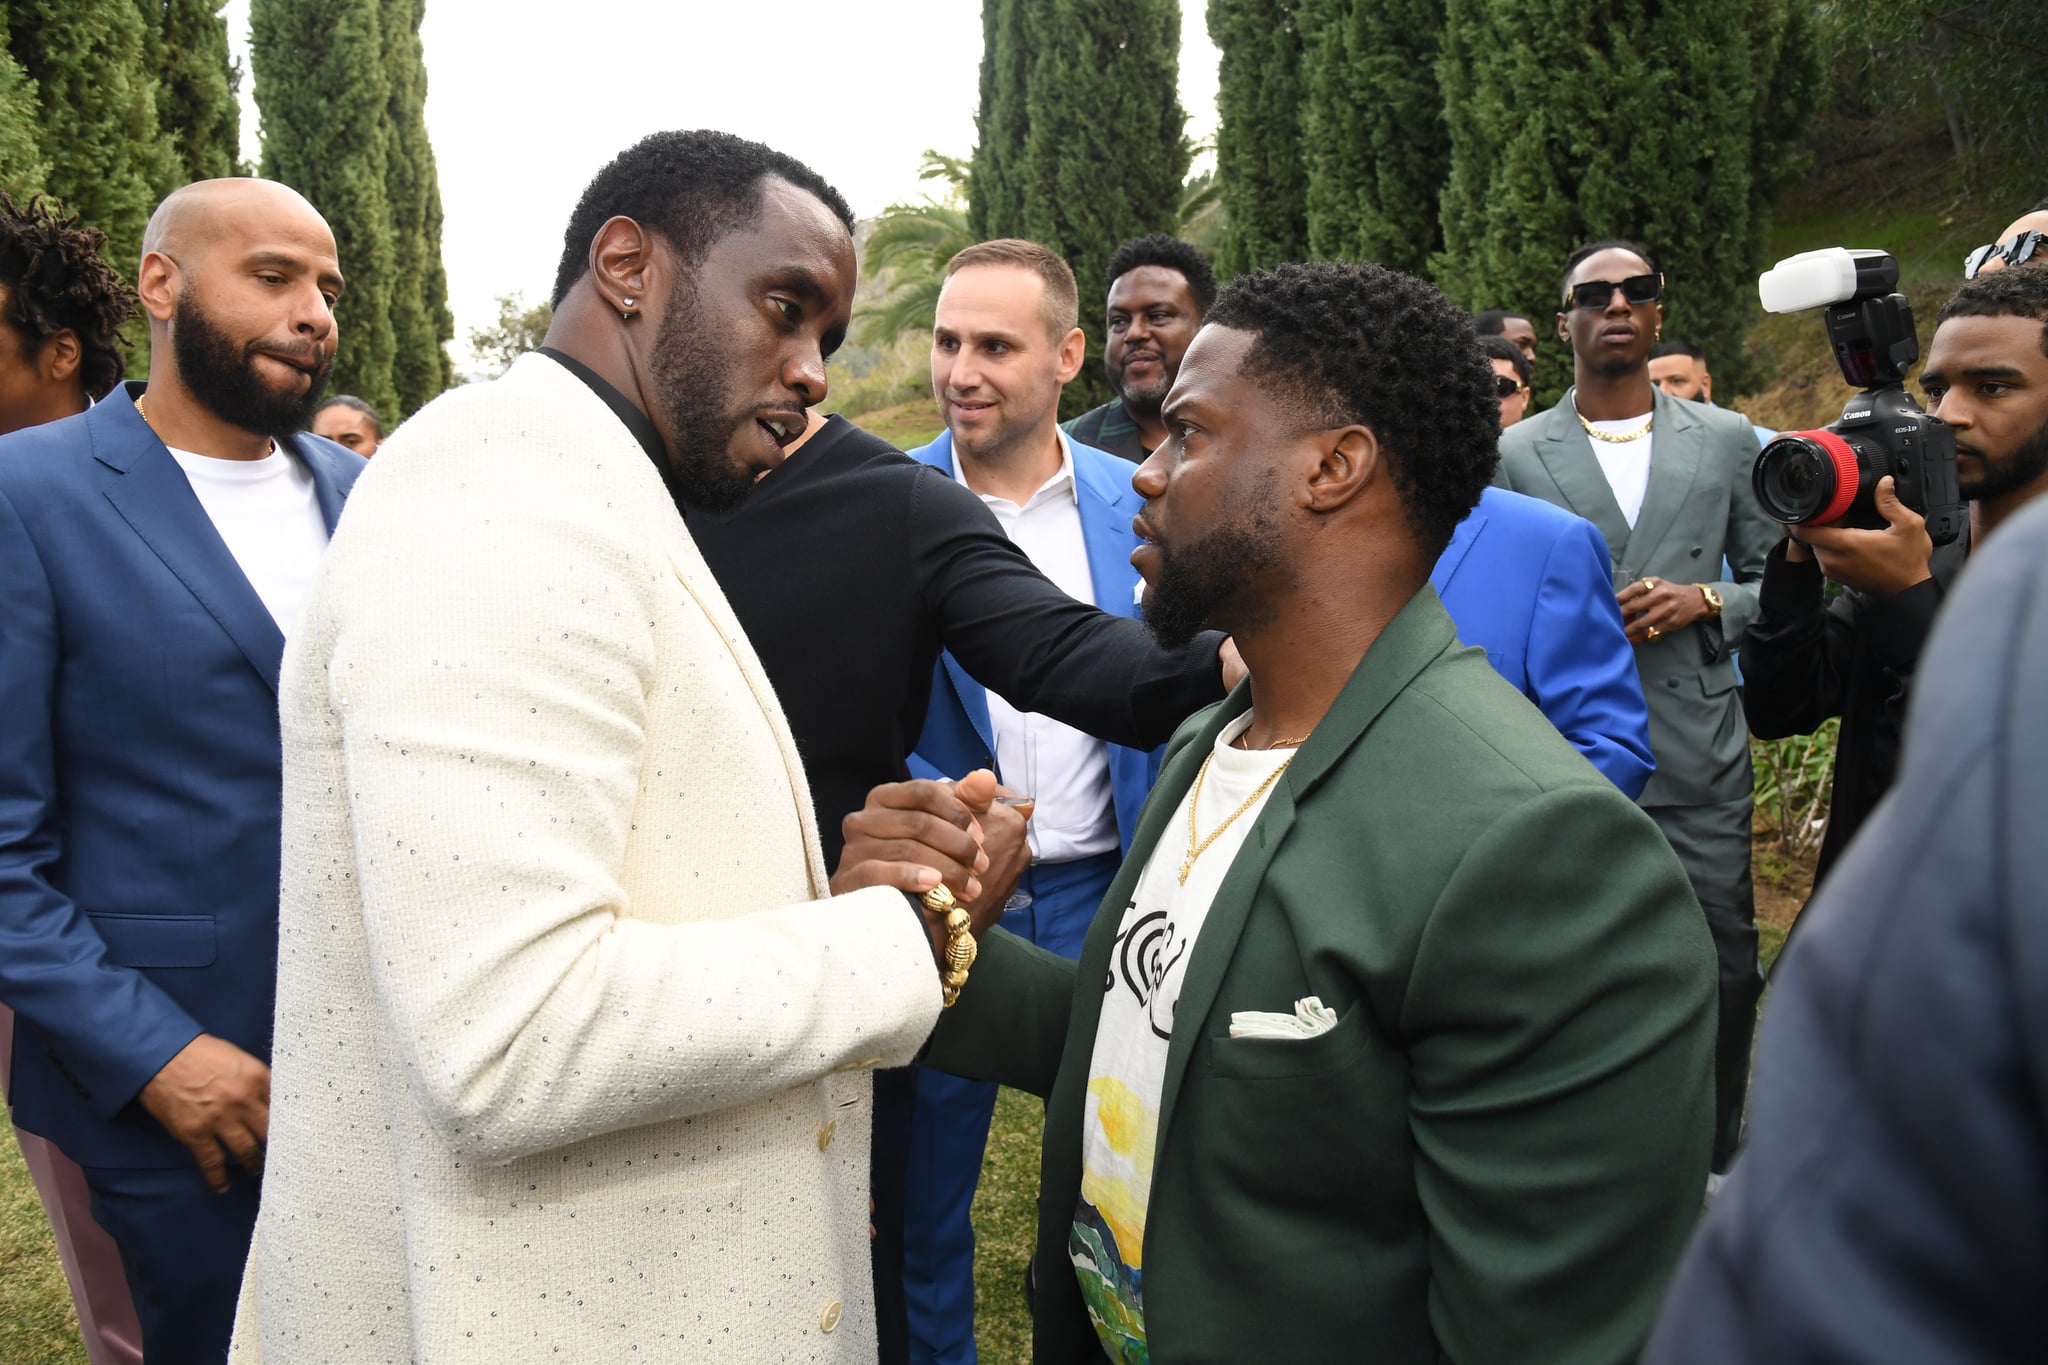 Diddy and Kevin Hart at the 2020 Roc Nation Brunch in LA | Seeing Stars! Beyoncé and JAY-Z's Roc Nation Brunch Brings Out Some of Music's Finest | POPSUGAR Celebrity UK Photo 48